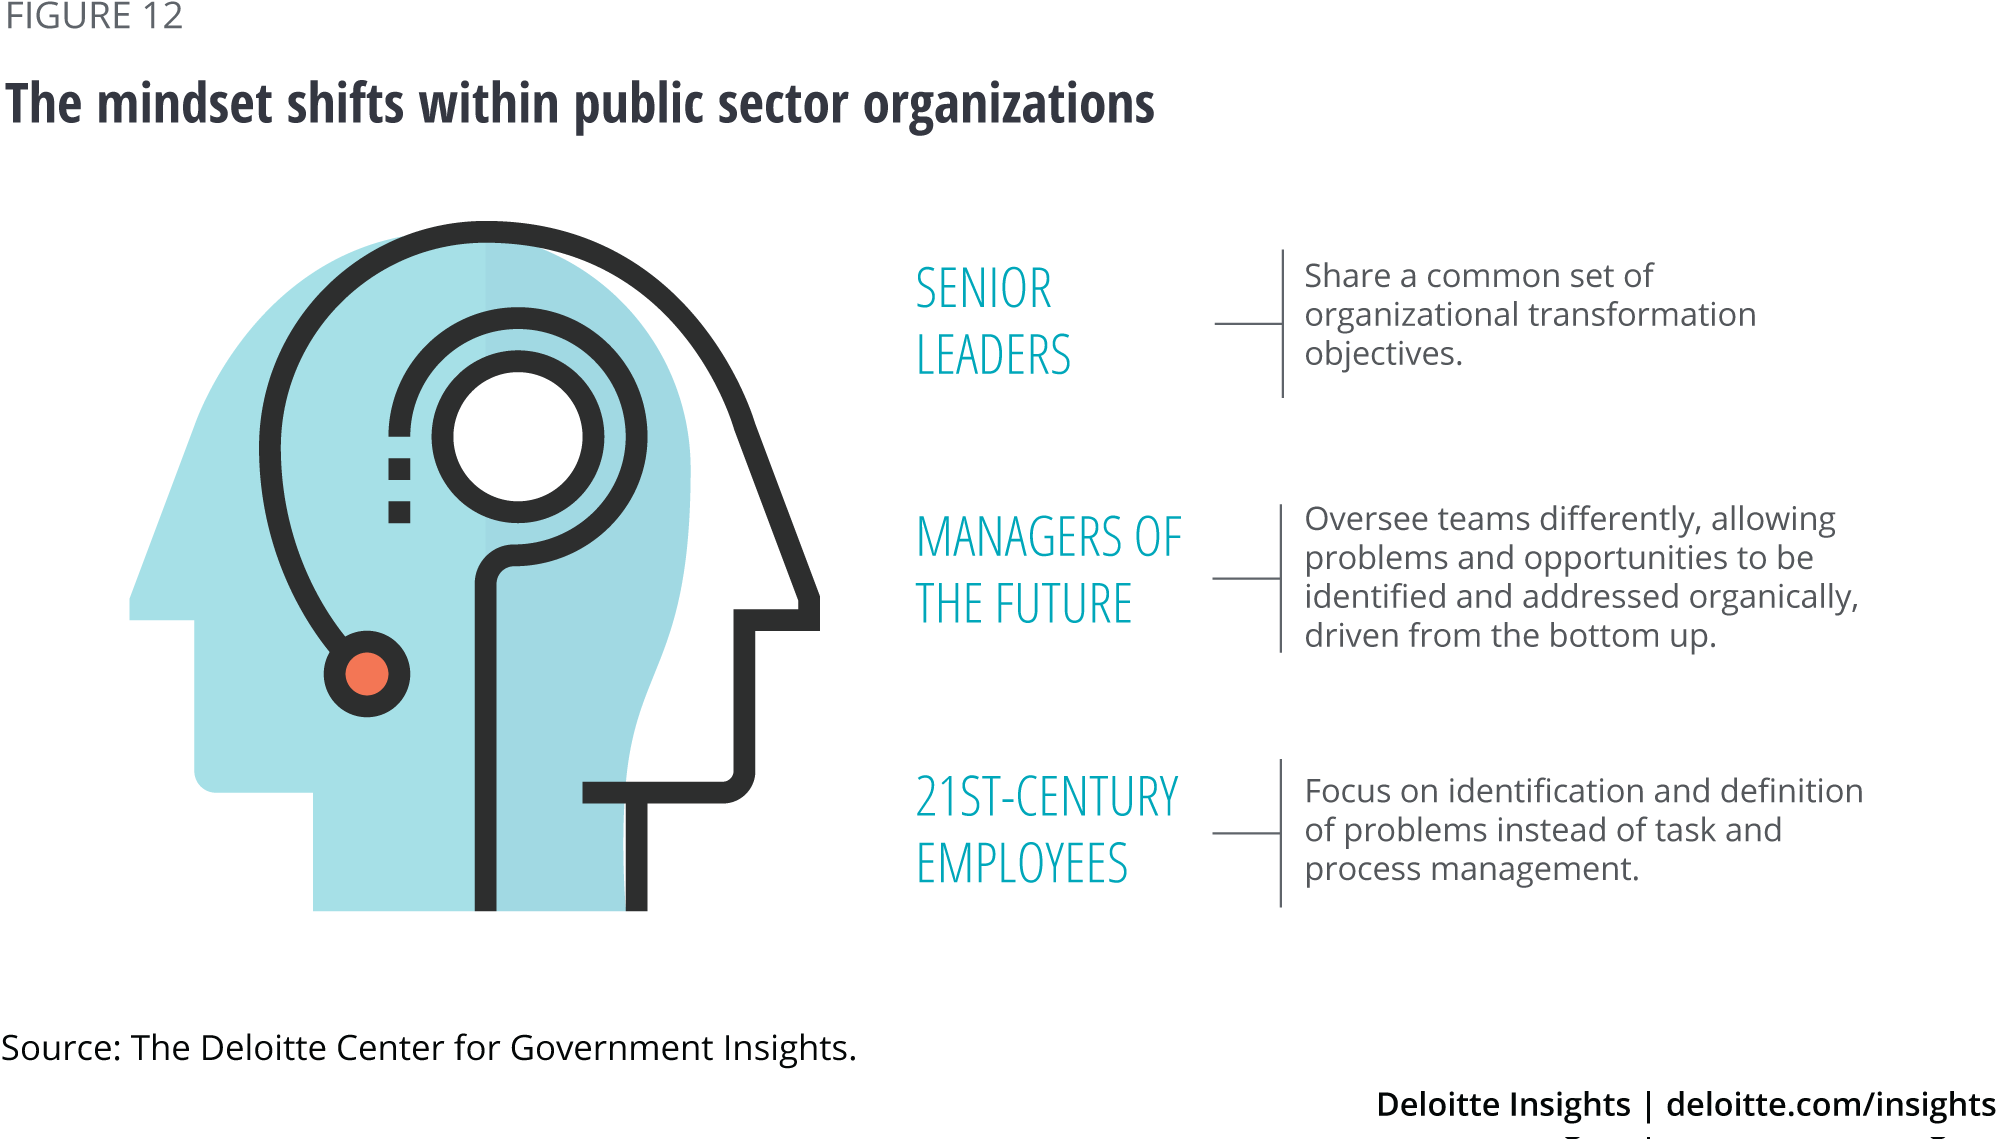 The mindset shifts within public sector organizations